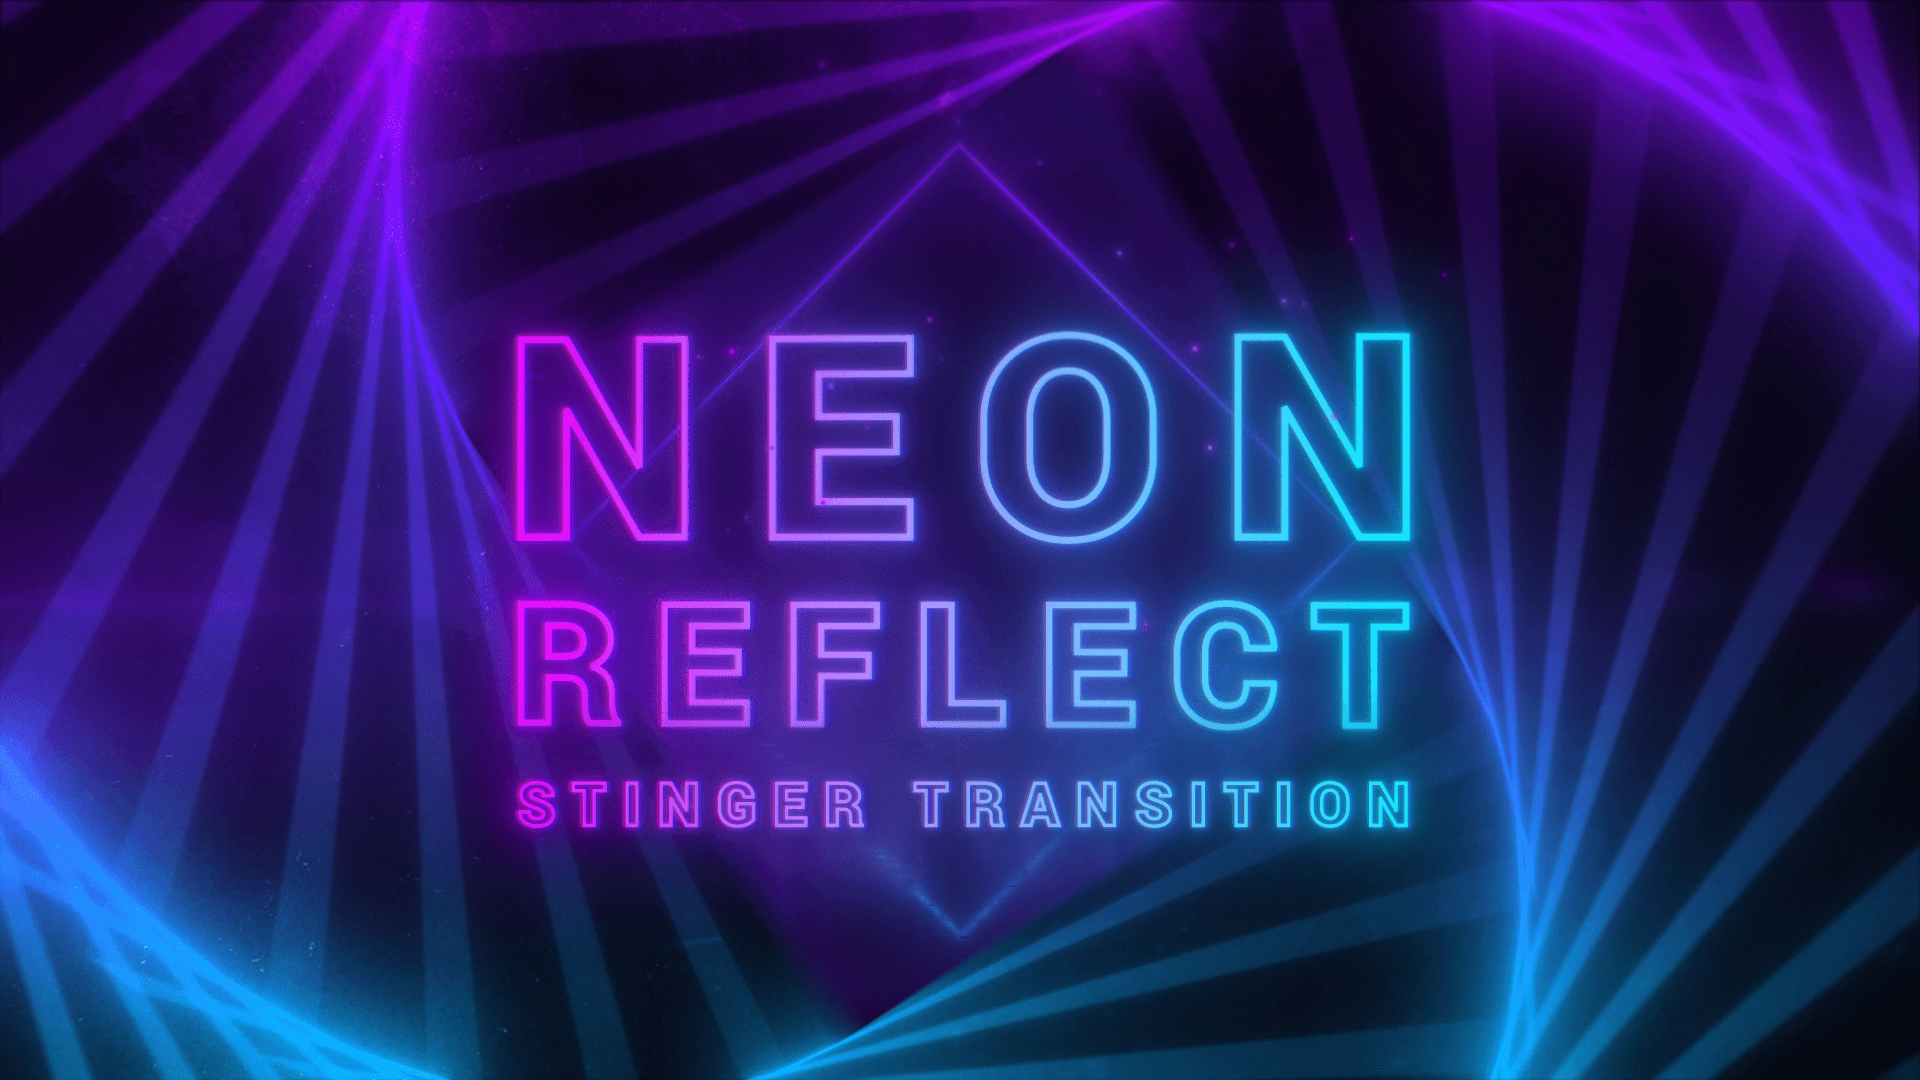 Neon Reflect - Stinger Transition for Twitch, Youtube and Facebook